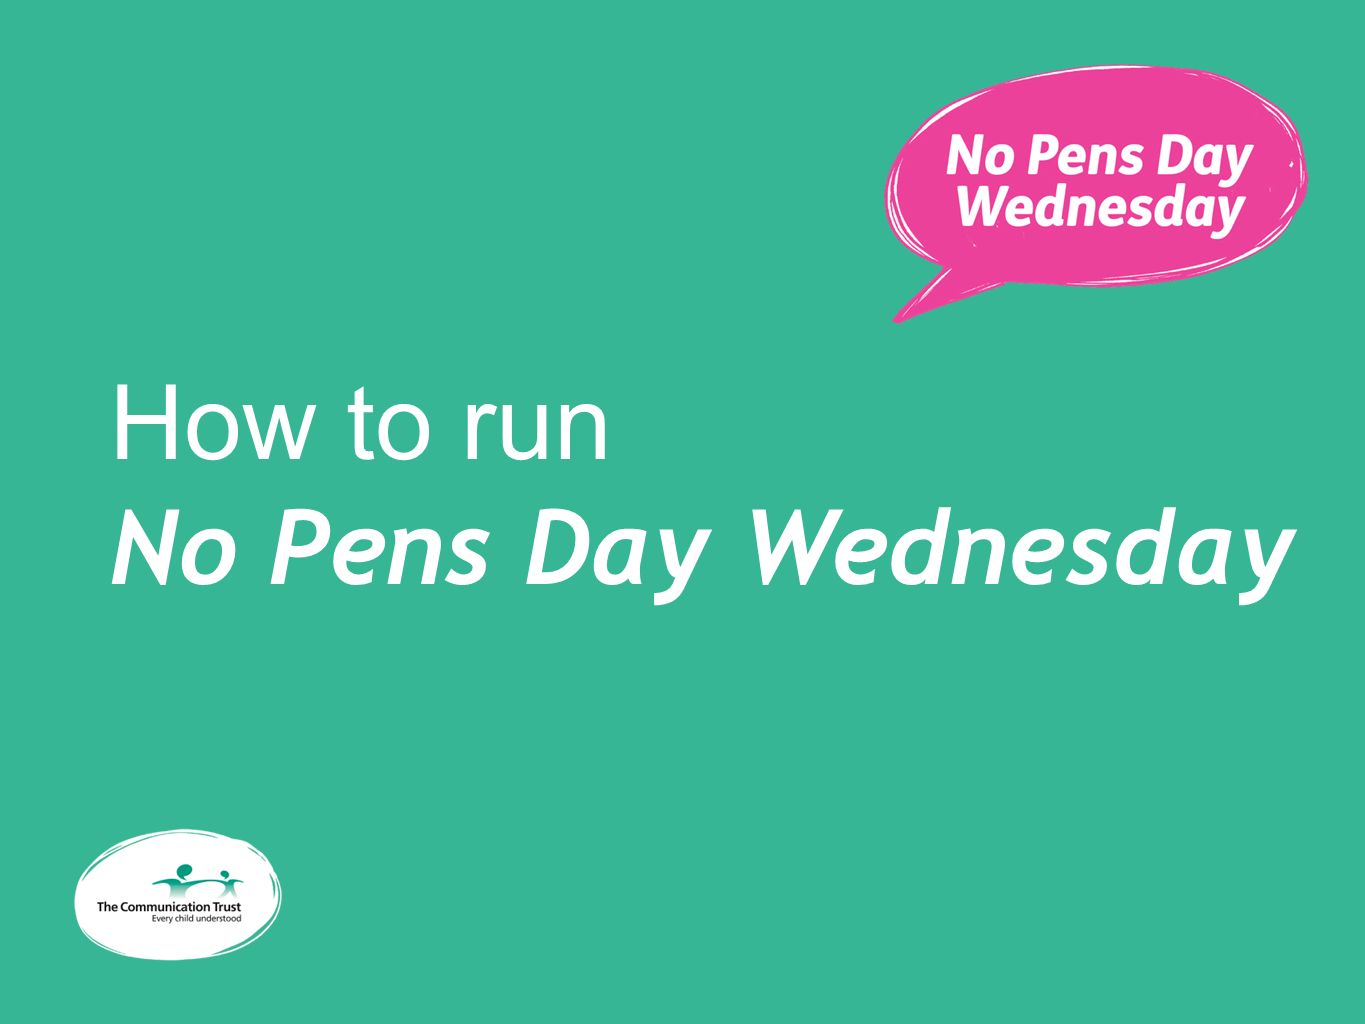 How to run No Pens Day Wednesday